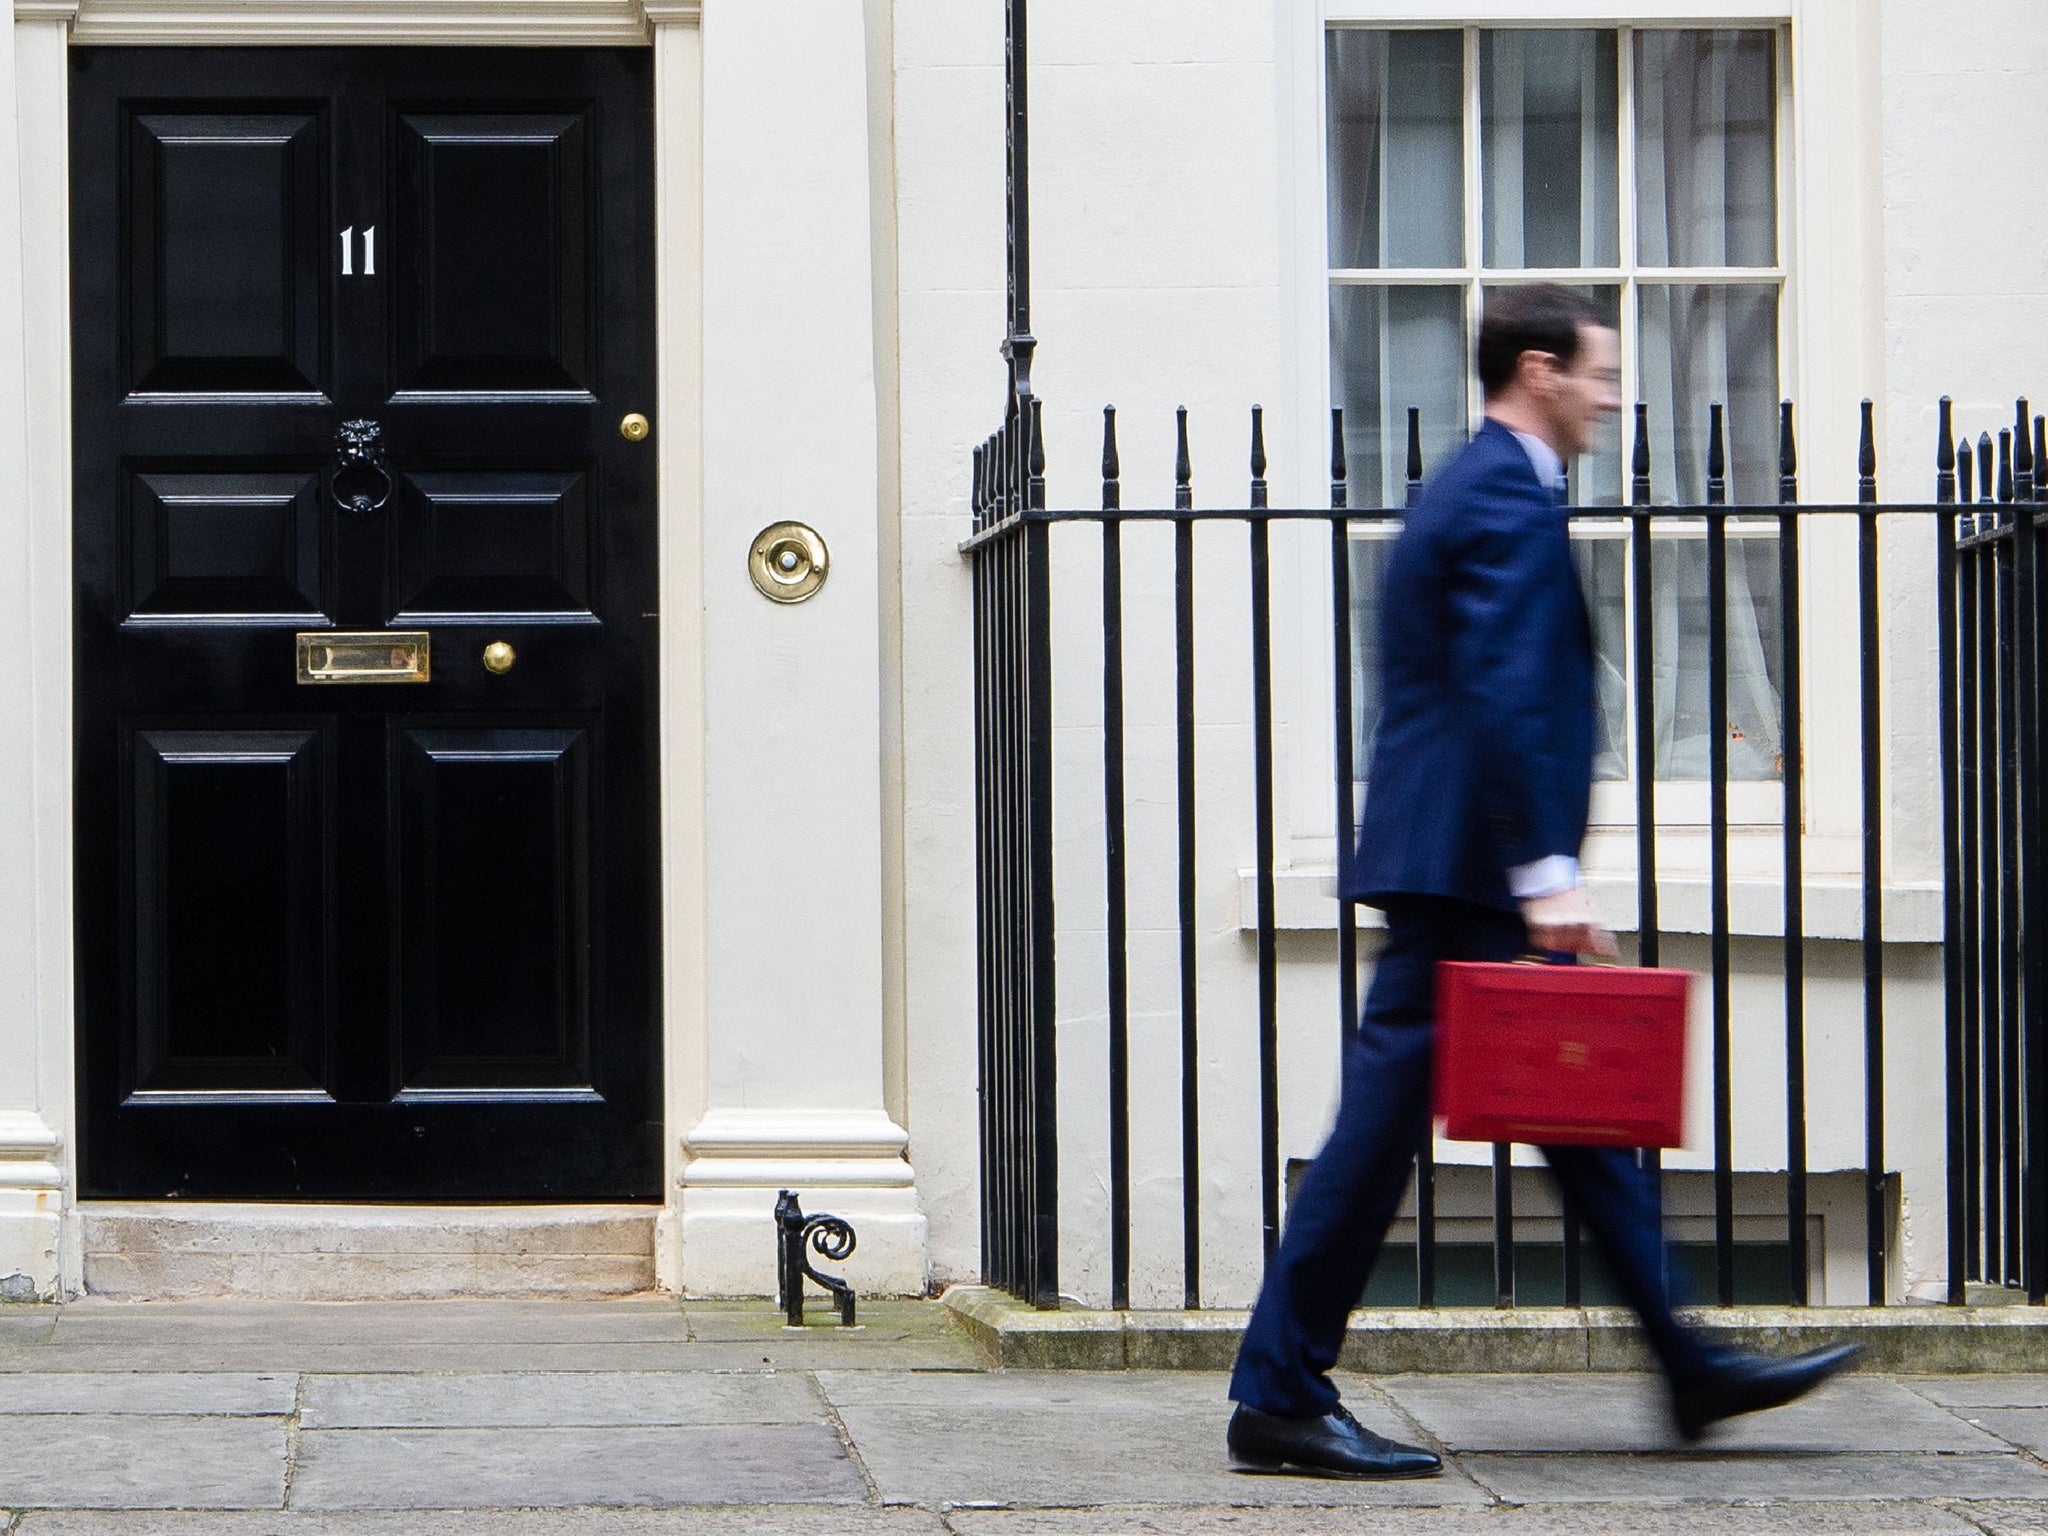 "For Osborne, the Budget could not have come at a more demanding junction"